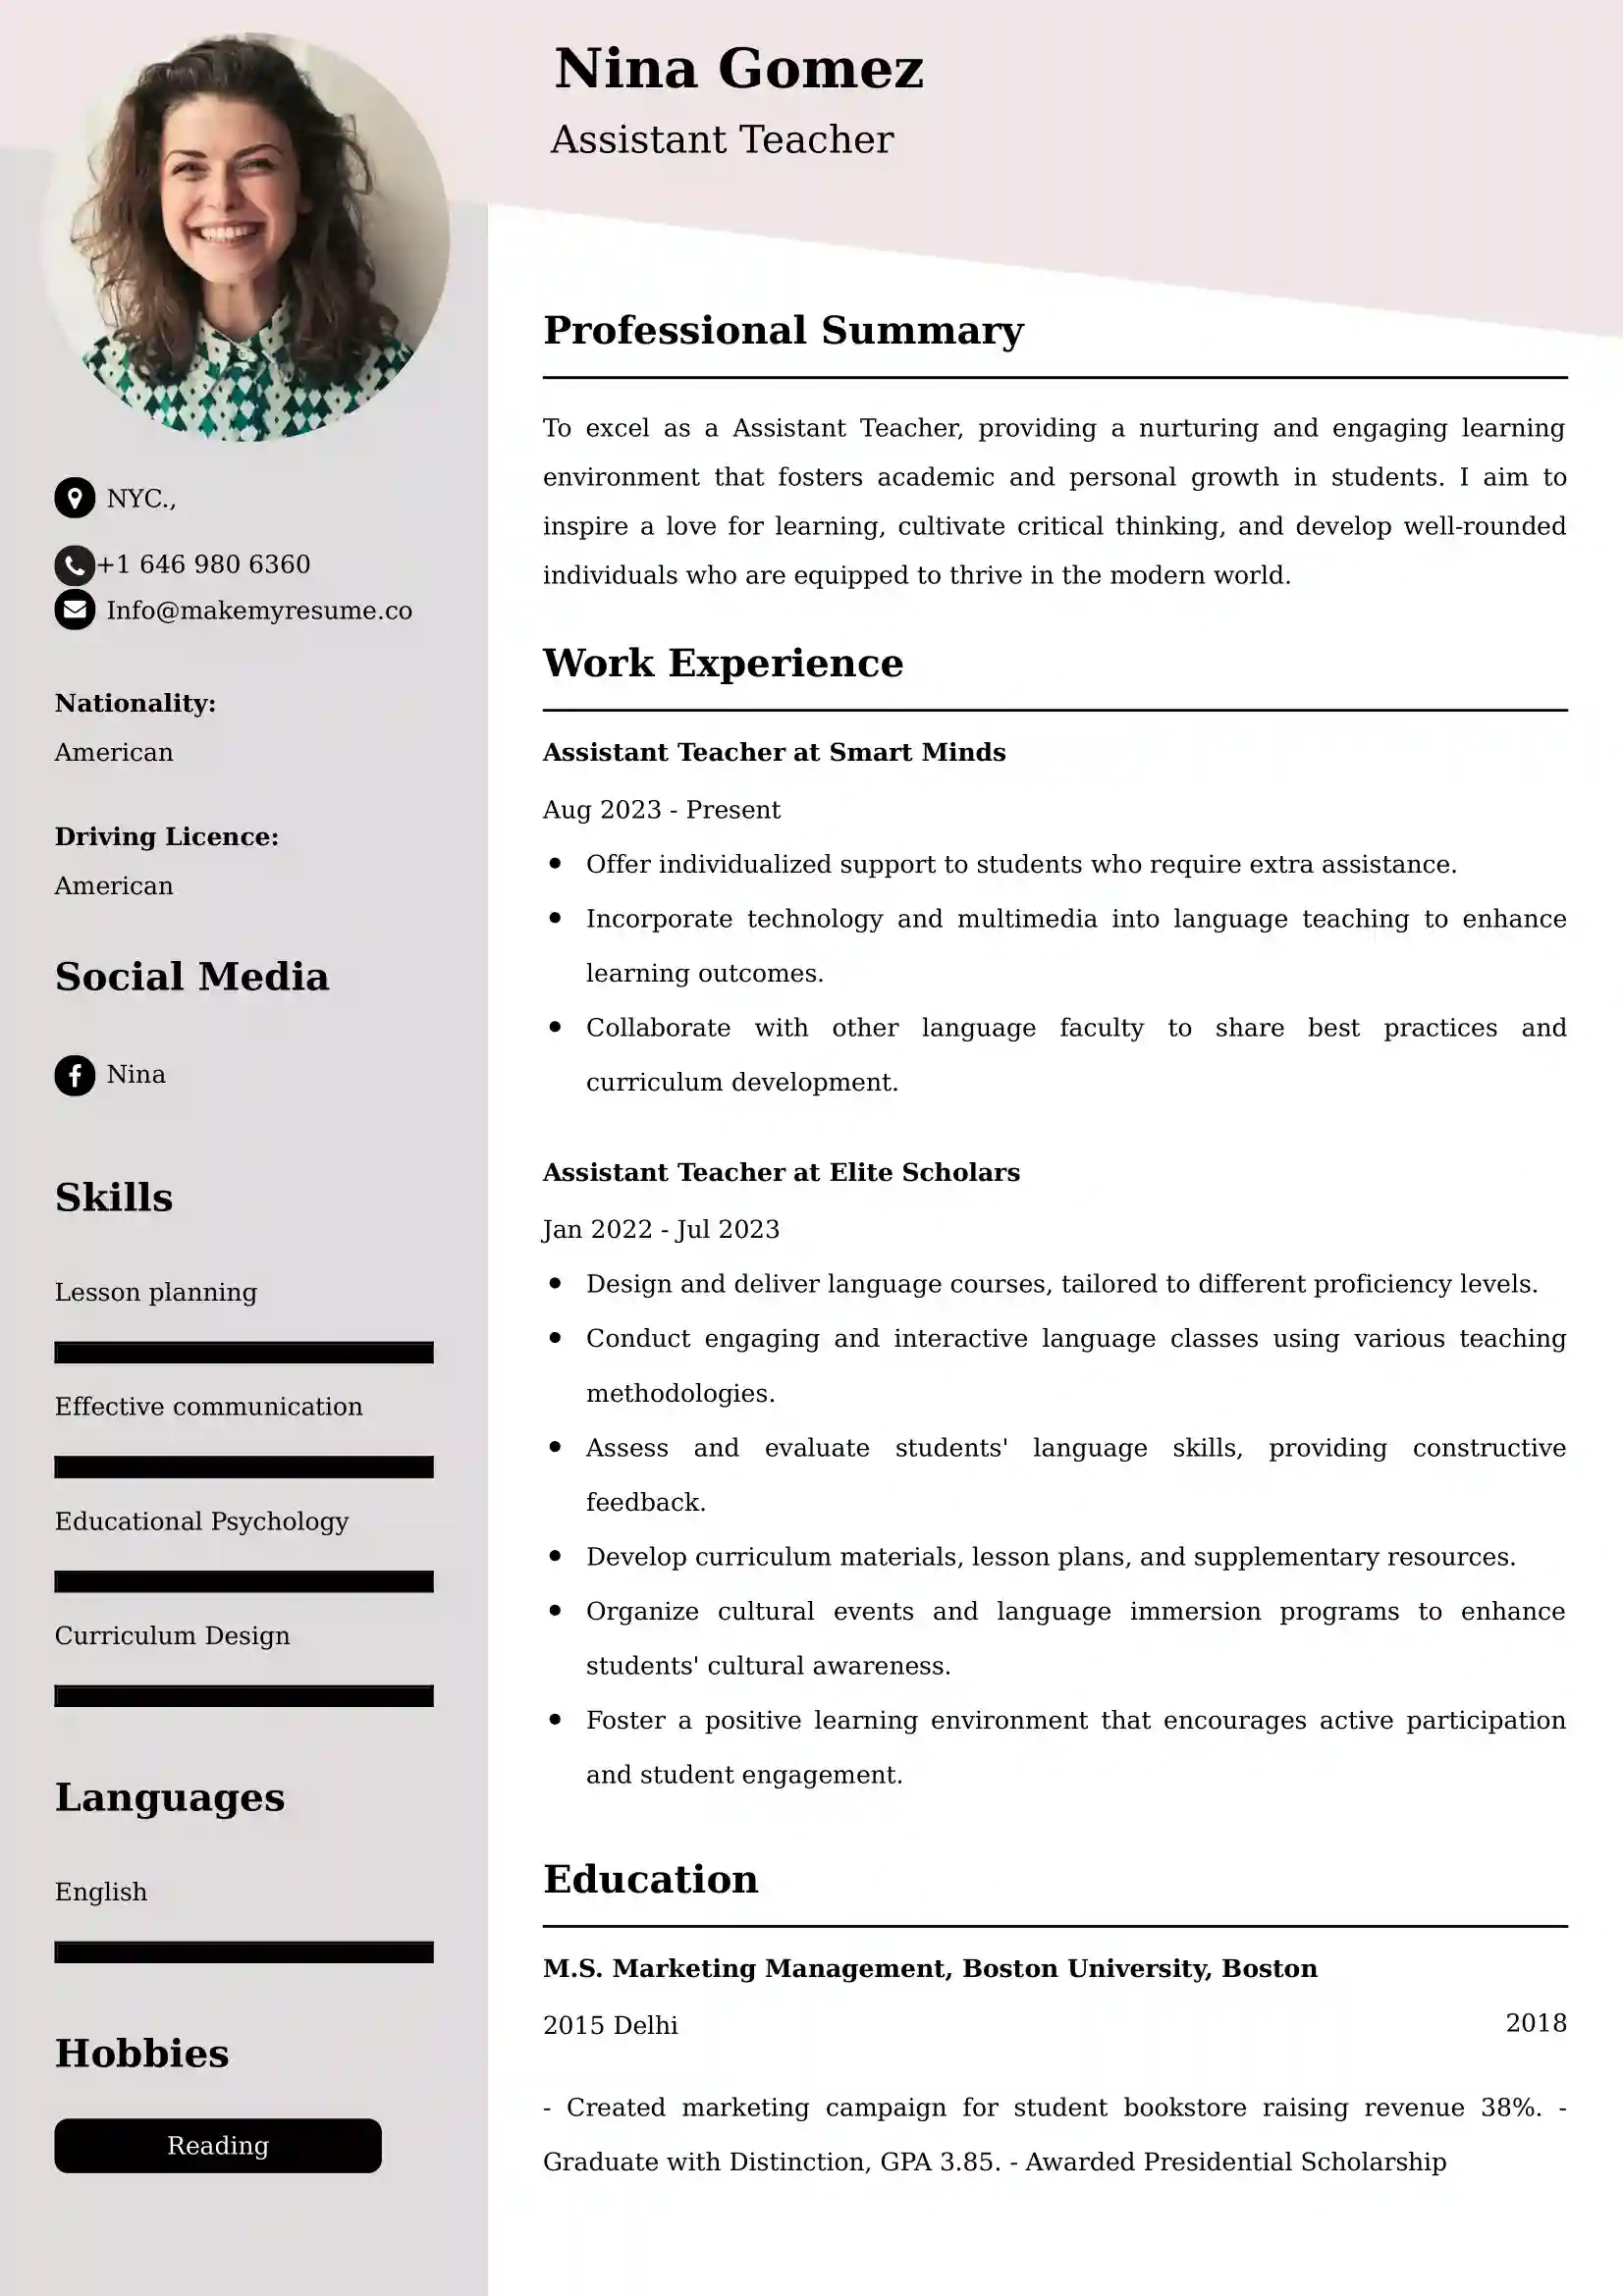 75+ Professional Teaching Resume Examples, Latest Format